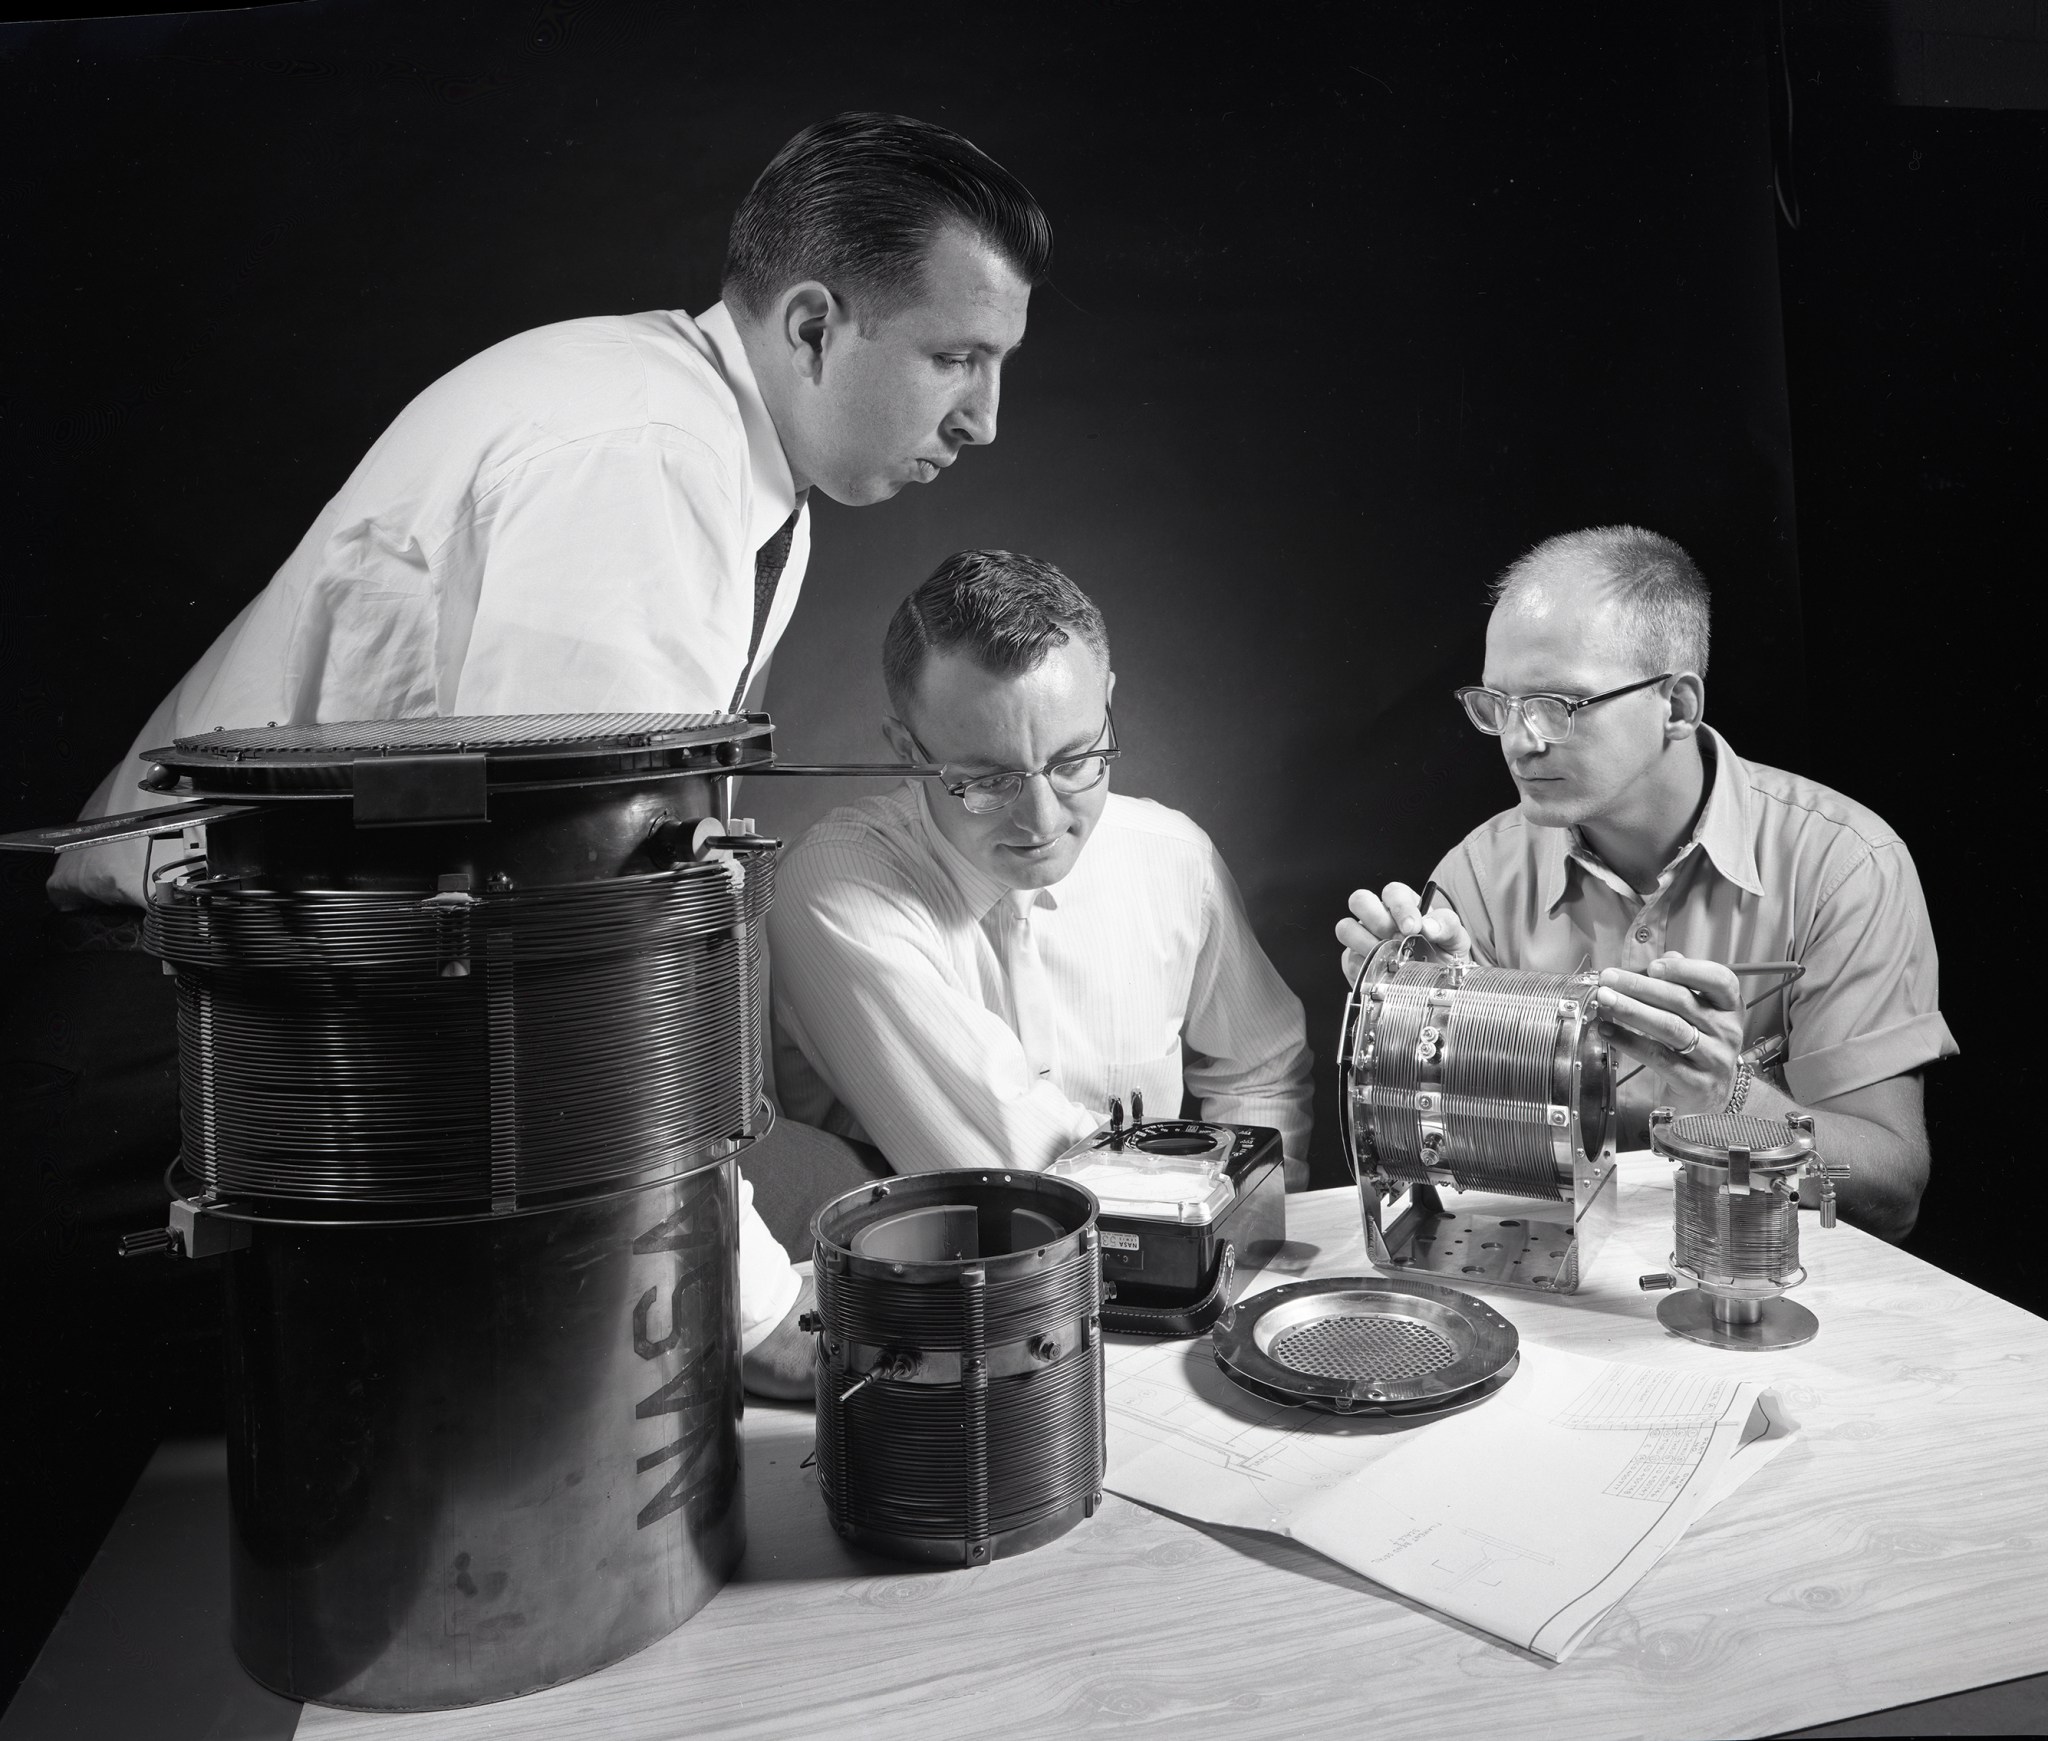 Three men working with components at table.